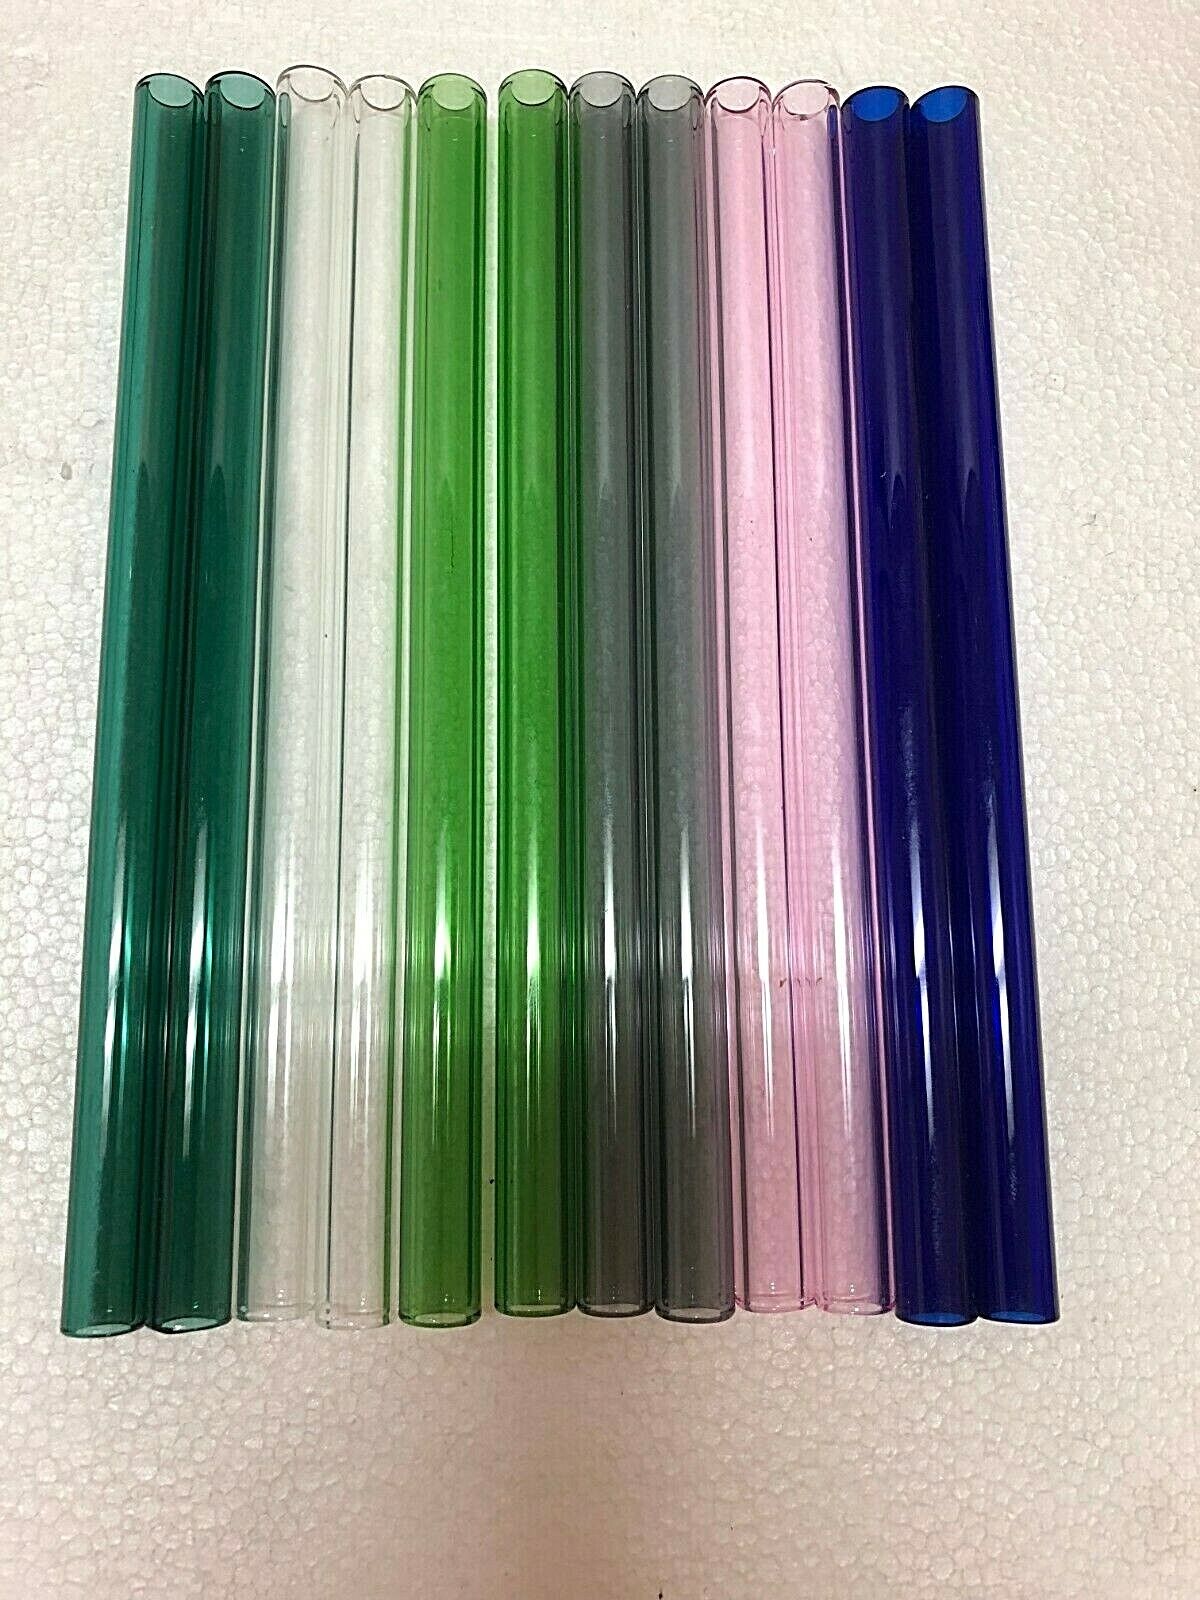 08 Pieces Glass tube Pyrex 12 mm X 2 mm X 12" Long   Blowing tube  ID=8mm  Color Pyrex Does Not Apply